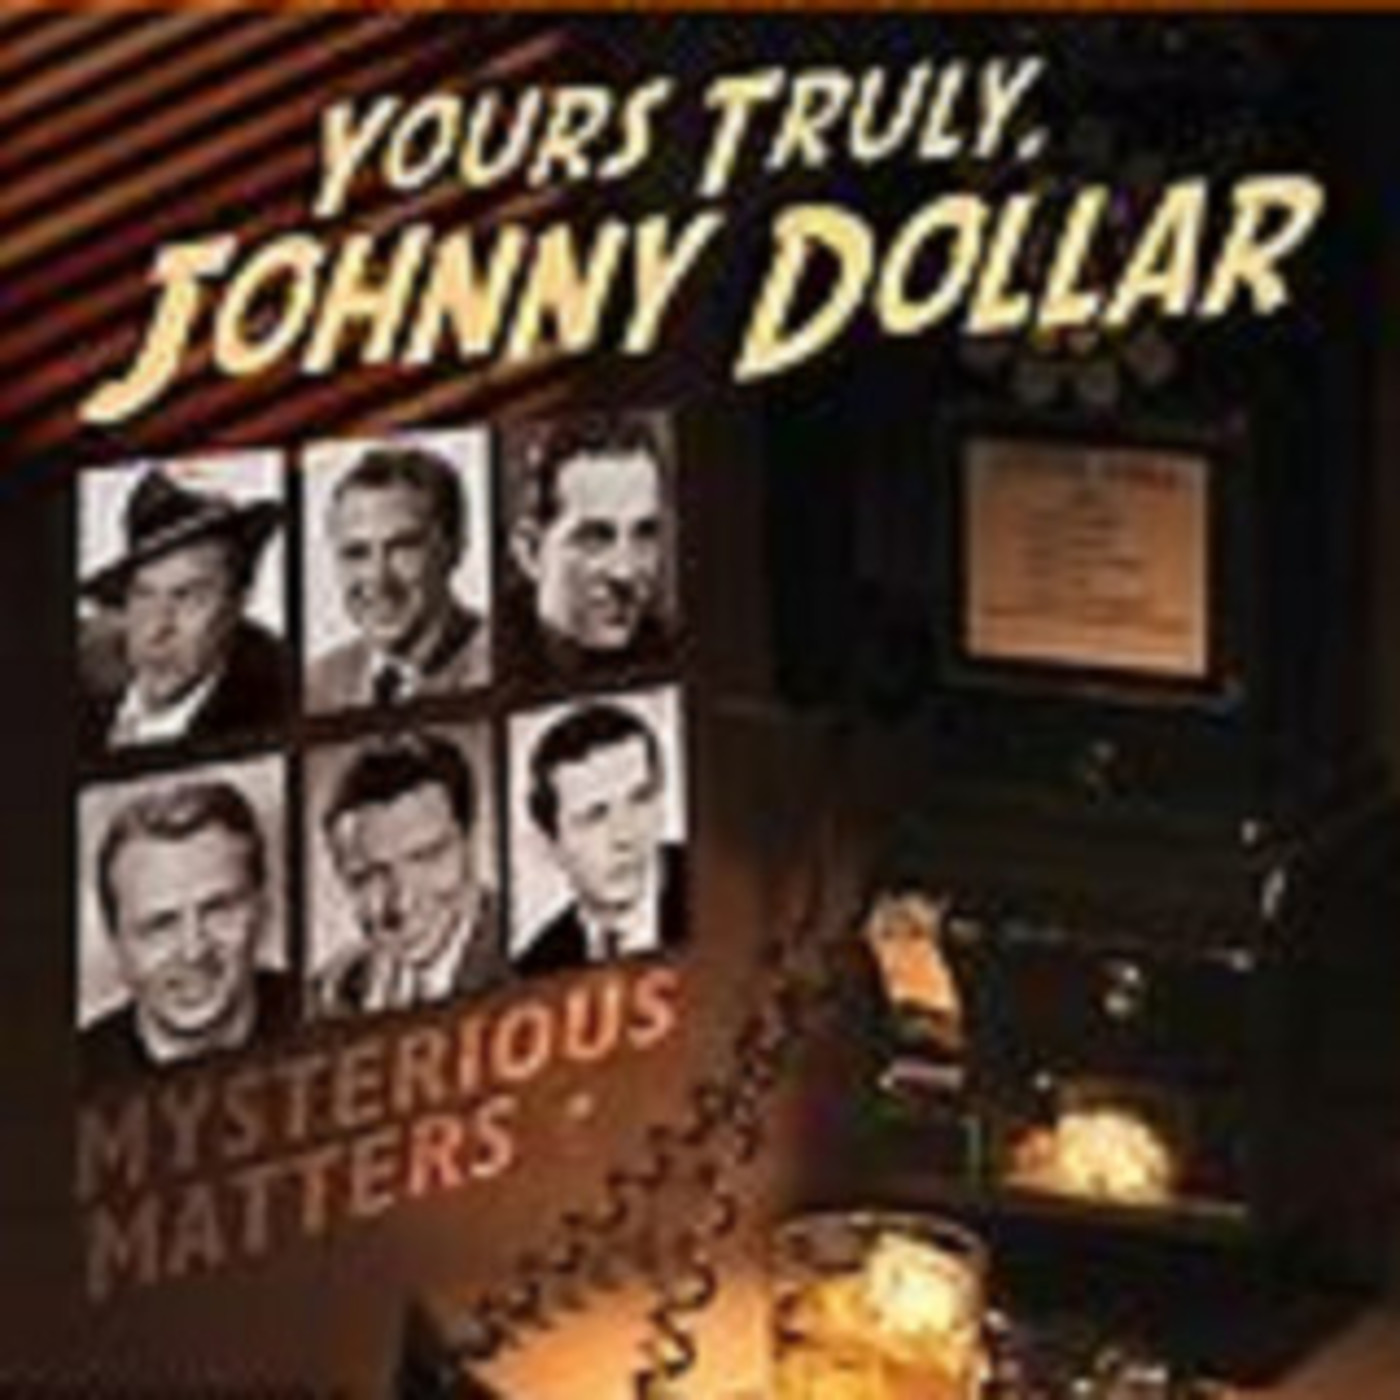 Yours Truly, Johnny Dollar - 032661, episode 733 - The Two's a Crowd Matter